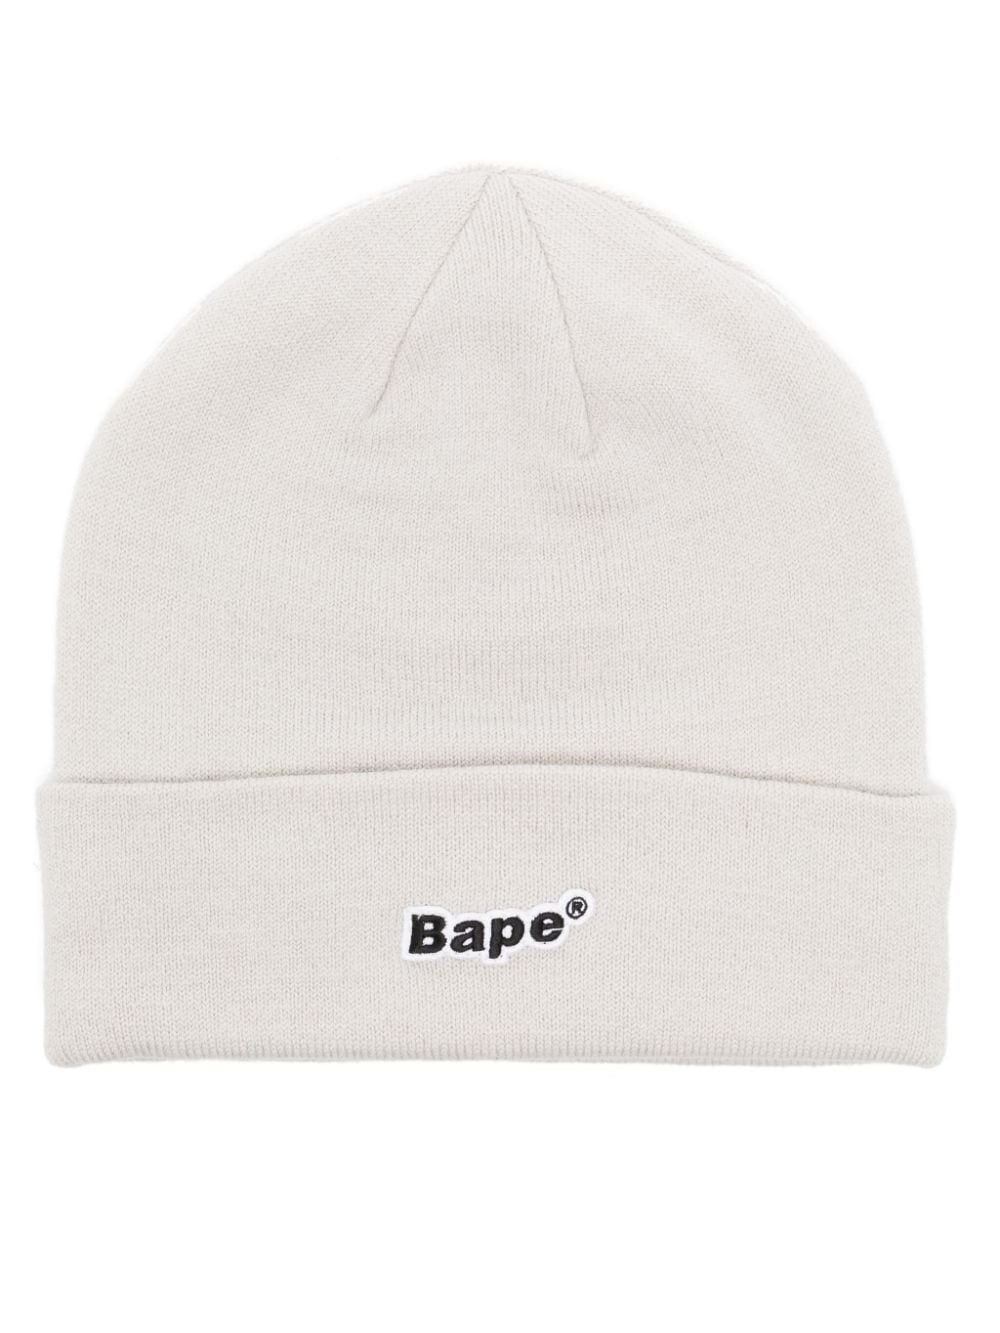 Bape-patch knitted beanie